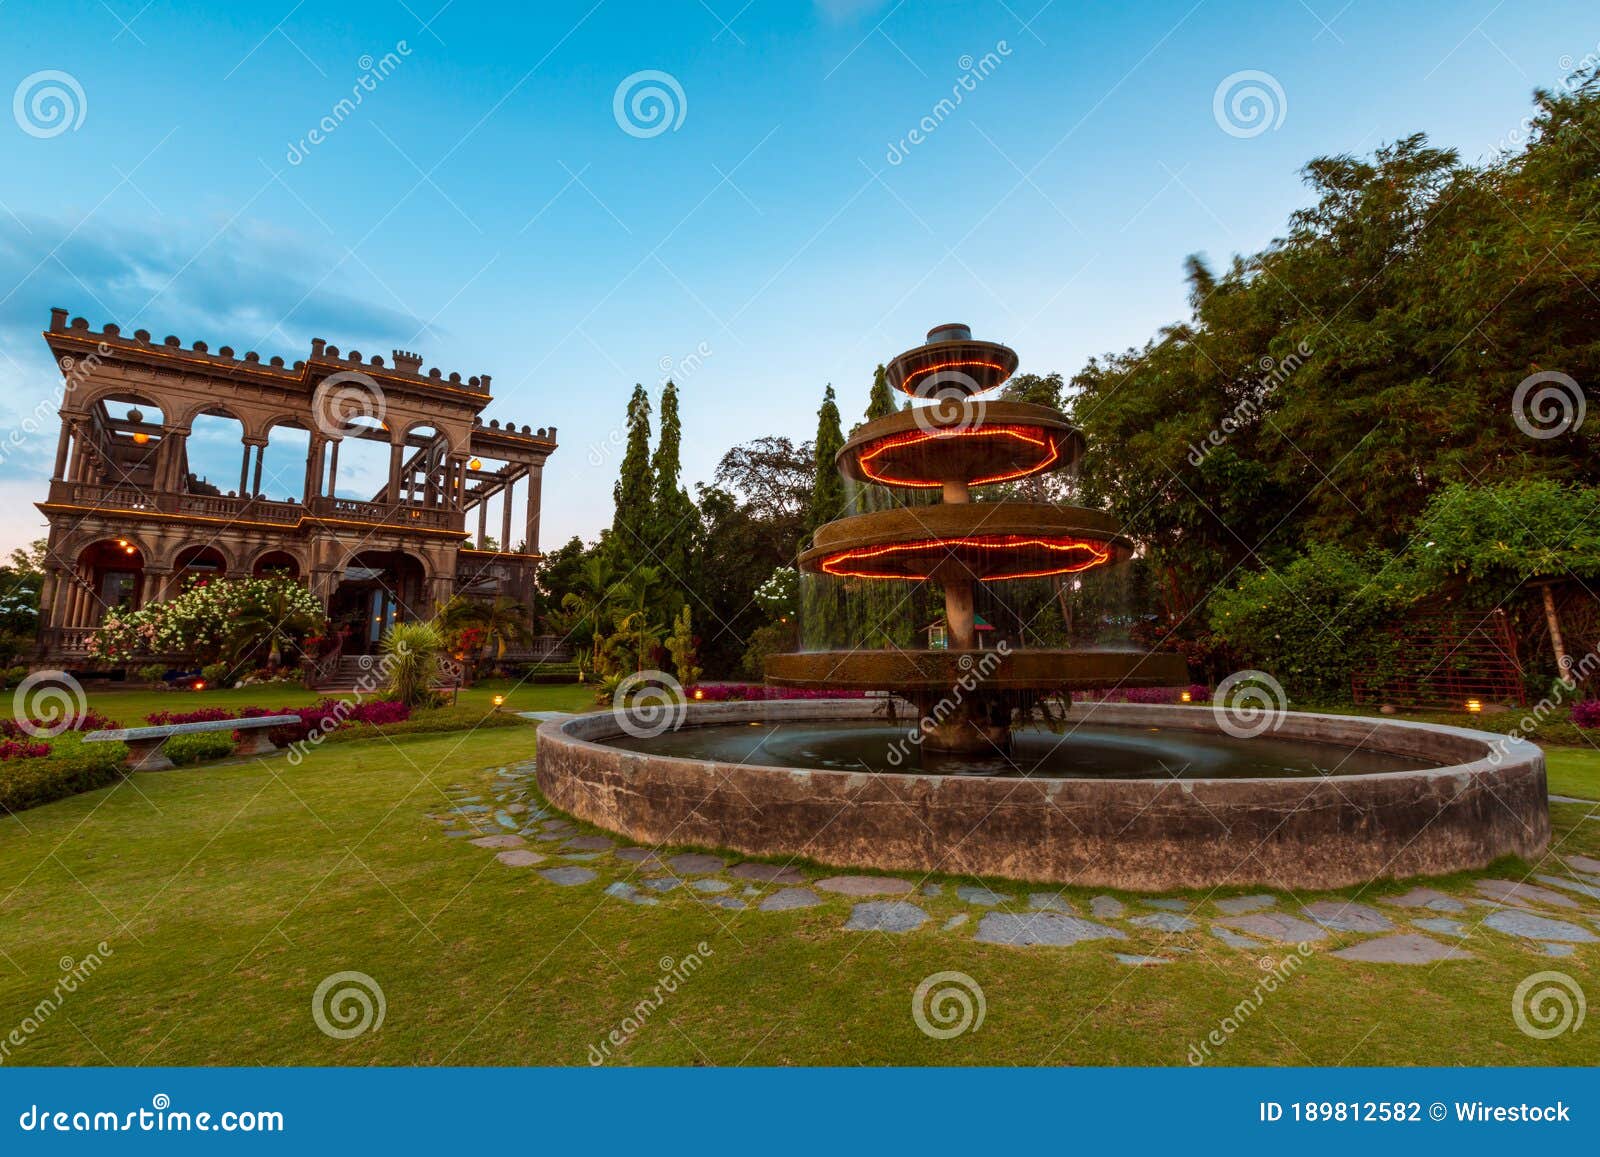 view of the negros occidental tourism center in talisay, the philippines on a bright day